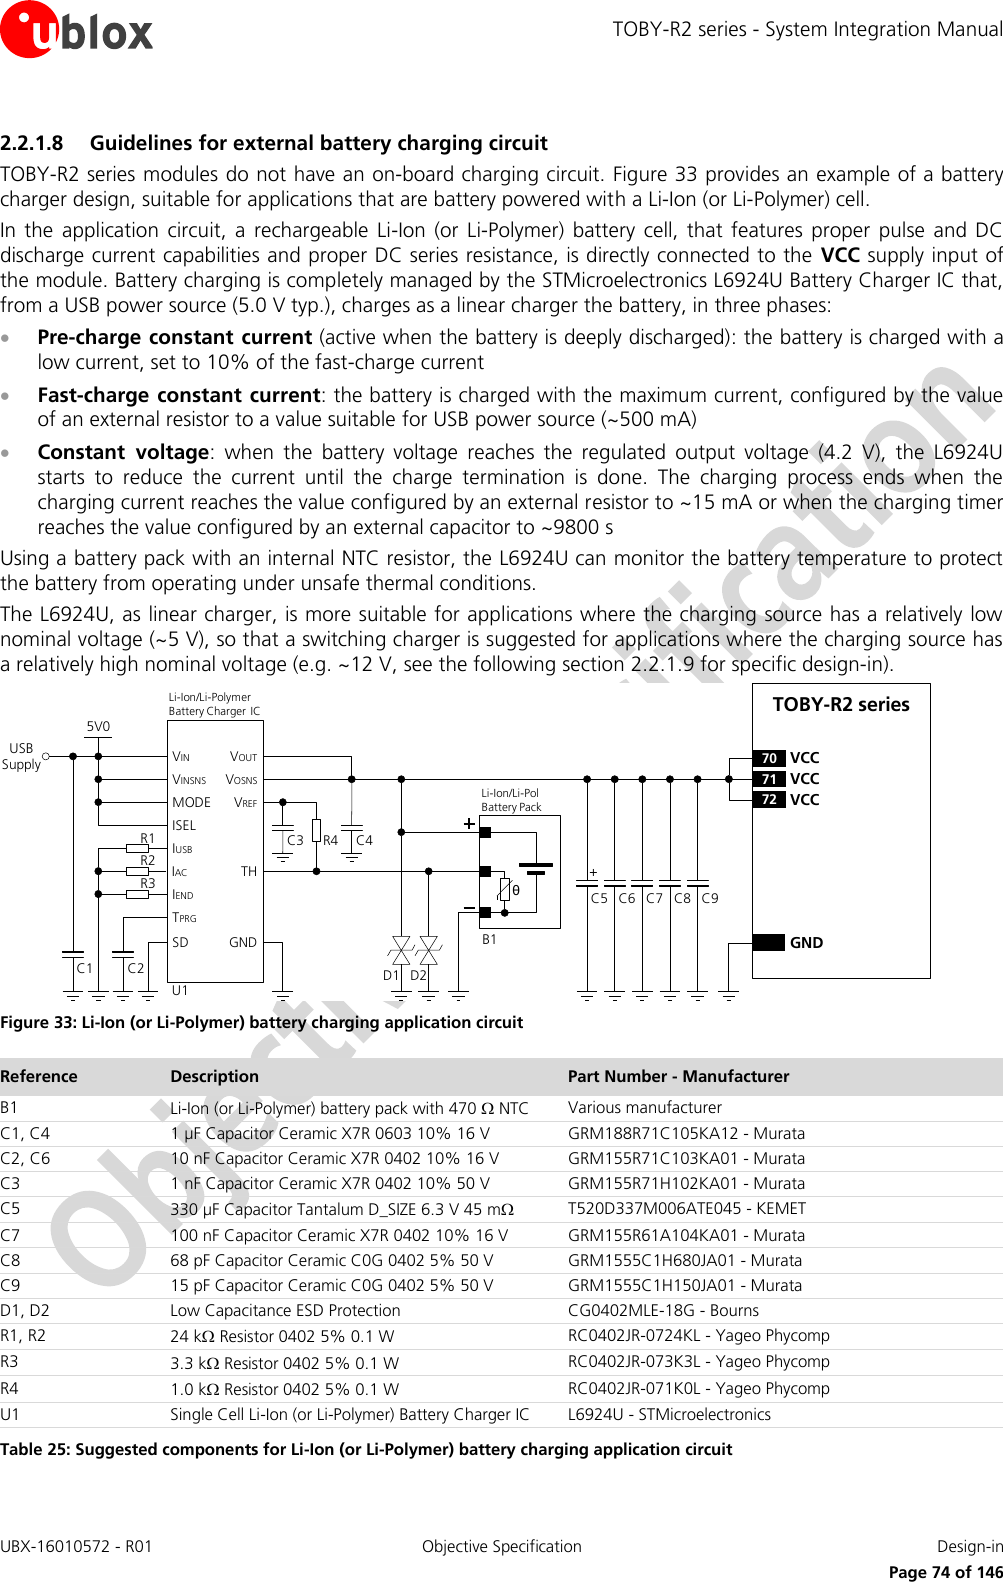 TOBY-R2 series - System Integration Manual UBX-16010572 - R01  Objective Specification  Design-in     Page 74 of 146 2.2.1.8 Guidelines for external battery charging circuit TOBY-R2 series modules do not have an on-board charging circuit. Figure 33 provides an example of a battery charger design, suitable for applications that are battery powered with a Li-Ion (or Li-Polymer) cell. In  the  application  circuit,  a  rechargeable  Li-Ion  (or Li-Polymer)  battery  cell,  that  features  proper  pulse  and  DC discharge current capabilities and proper DC series resistance, is directly connected to the  VCC supply input of the module. Battery charging is completely managed by the STMicroelectronics L6924U Battery Charger IC that, from a USB power source (5.0 V typ.), charges as a linear charger the battery, in three phases:  Pre-charge constant current (active when the battery is deeply discharged): the battery is charged with a low current, set to 10% of the fast-charge current  Fast-charge constant current: the battery is charged with the maximum current, configured by the value of an external resistor to a value suitable for USB power source (~500 mA)  Constant  voltage:  when  the  battery  voltage  reaches  the  regulated  output  voltage  (4.2  V),  the  L6924U starts  to  reduce  the  current  until  the  charge  termination  is  done.  The  charging  process  ends  when  the charging current reaches the value configured by an external resistor to ~15 mA or when the charging timer reaches the value configured by an external capacitor to ~9800 s Using a battery pack with an internal NTC resistor, the L6924U can monitor the battery temperature to protect the battery from operating under unsafe thermal conditions. The L6924U, as linear charger, is more suitable for applications where the charging source has a relatively low nominal voltage (~5 V), so that a switching charger is suggested for applications where the charging source has a relatively high nominal voltage (e.g. ~12 V, see the following section 2.2.1.9 for specific design-in). C5 C8C7C6 C9GNDTOBY-R2 series71 VCC72 VCC70 VCC+USB SupplyC3 R4θU1IUSBIACIENDTPRGSDVINVINSNSMODEISELC2C15V0THGNDVOUTVOSNSVREFR1R2R3Li-Ion/Li-Pol Battery PackD1B1C4Li-Ion/Li-Polymer    Battery Charger ICD2 Figure 33: Li-Ion (or Li-Polymer) battery charging application circuit Reference Description Part Number - Manufacturer B1 Li-Ion (or Li-Polymer) battery pack with 470  NTC Various manufacturer C1, C4 1 µF Capacitor Ceramic X7R 0603 10% 16 V GRM188R71C105KA12 - Murata C2, C6 10 nF Capacitor Ceramic X7R 0402 10% 16 V GRM155R71C103KA01 - Murata C3 1 nF Capacitor Ceramic X7R 0402 10% 50 V GRM155R71H102KA01 - Murata C5 330 µF Capacitor Tantalum D_SIZE 6.3 V 45 m T520D337M006ATE045 - KEMET C7 100 nF Capacitor Ceramic X7R 0402 10% 16 V GRM155R61A104KA01 - Murata C8 68 pF Capacitor Ceramic C0G 0402 5% 50 V GRM1555C1H680JA01 - Murata C9 15 pF Capacitor Ceramic C0G 0402 5% 50 V GRM1555C1H150JA01 - Murata D1, D2 Low Capacitance ESD Protection CG0402MLE-18G - Bourns R1, R2 24 k Resistor 0402 5% 0.1 W RC0402JR-0724KL - Yageo Phycomp R3 3.3 k Resistor 0402 5% 0.1 W RC0402JR-073K3L - Yageo Phycomp R4 1.0 k Resistor 0402 5% 0.1 W RC0402JR-071K0L - Yageo Phycomp U1 Single Cell Li-Ion (or Li-Polymer) Battery Charger IC  L6924U - STMicroelectronics Table 25: Suggested components for Li-Ion (or Li-Polymer) battery charging application circuit  